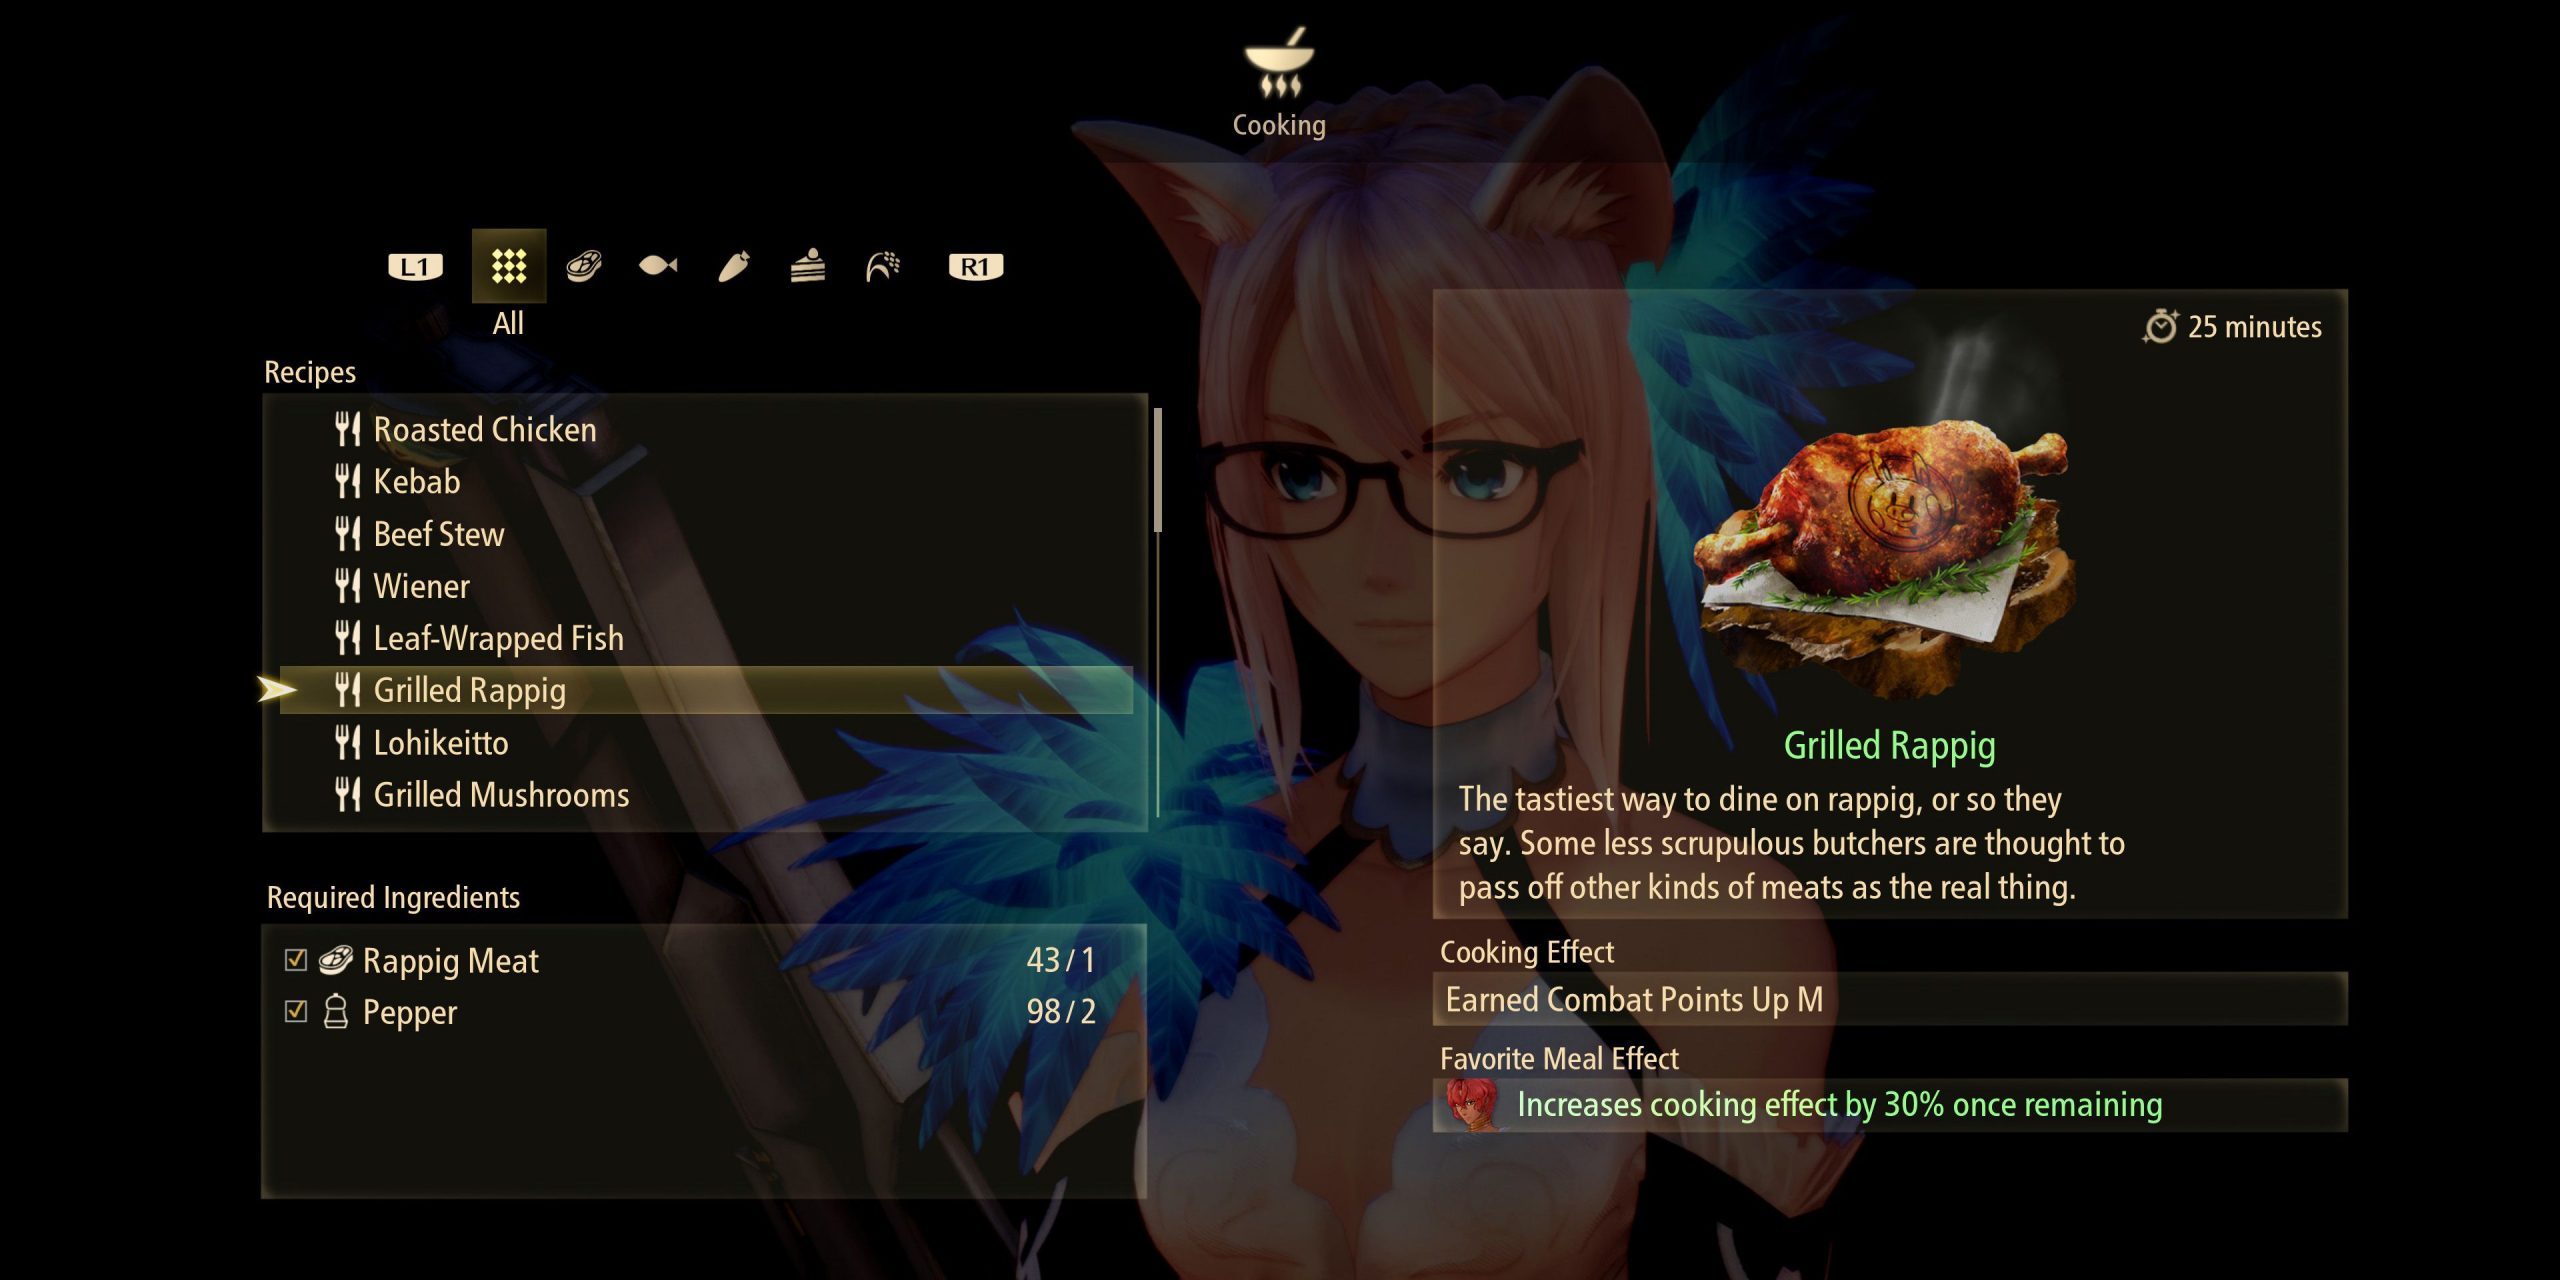 tales-of-arise-cooking-recipes-06-grilled-rappig-6414920